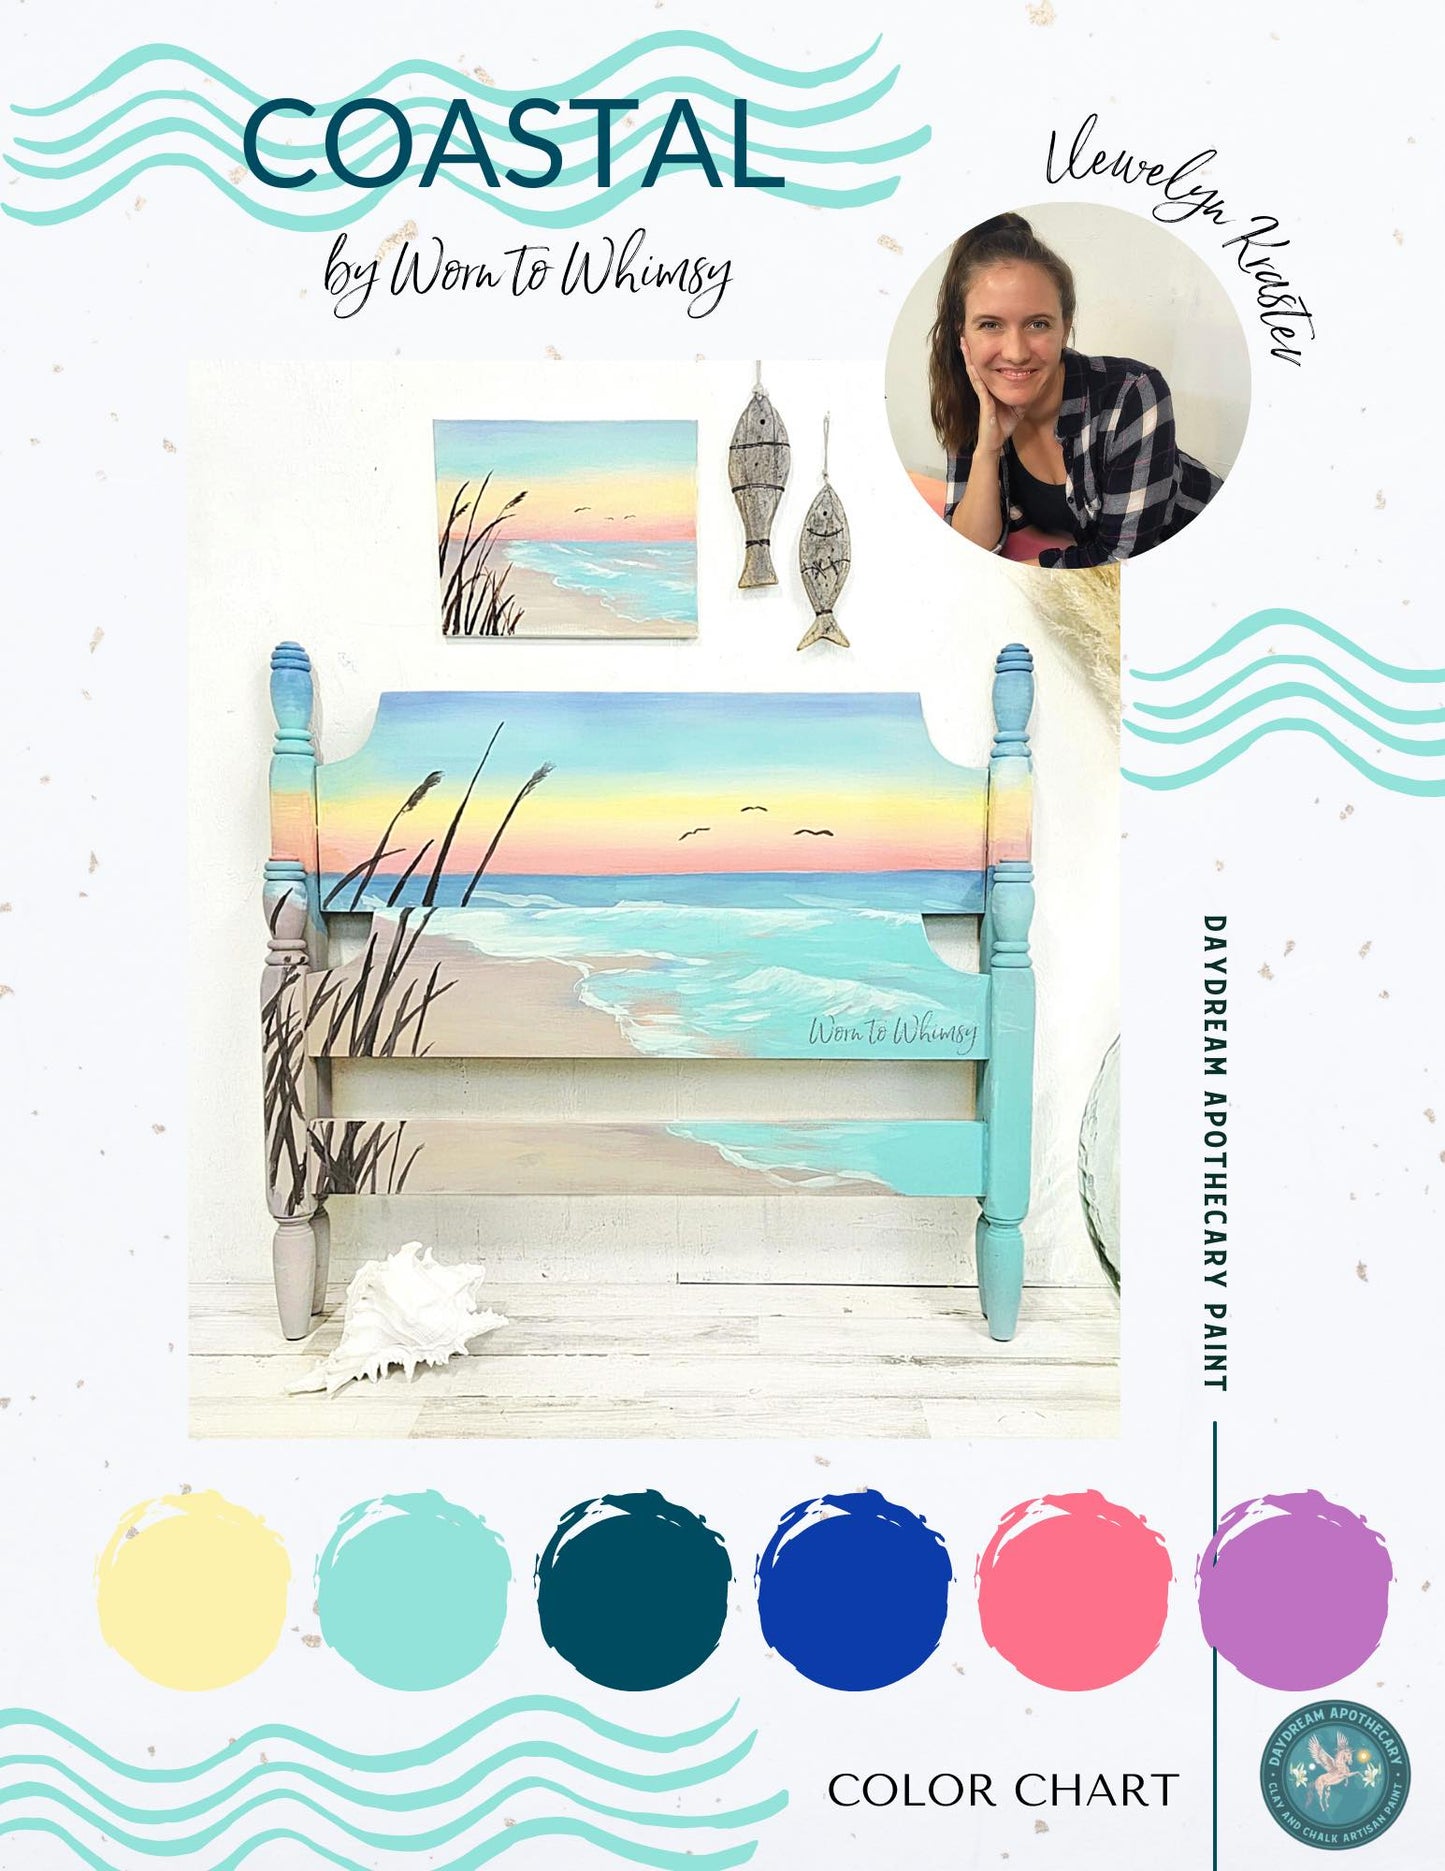 CLOSEOUT SALE! Scuba Girl🌊 COASTAL by Worn to Whimsy | Daydream Apothecary Clay and Chalk Artisan Paint